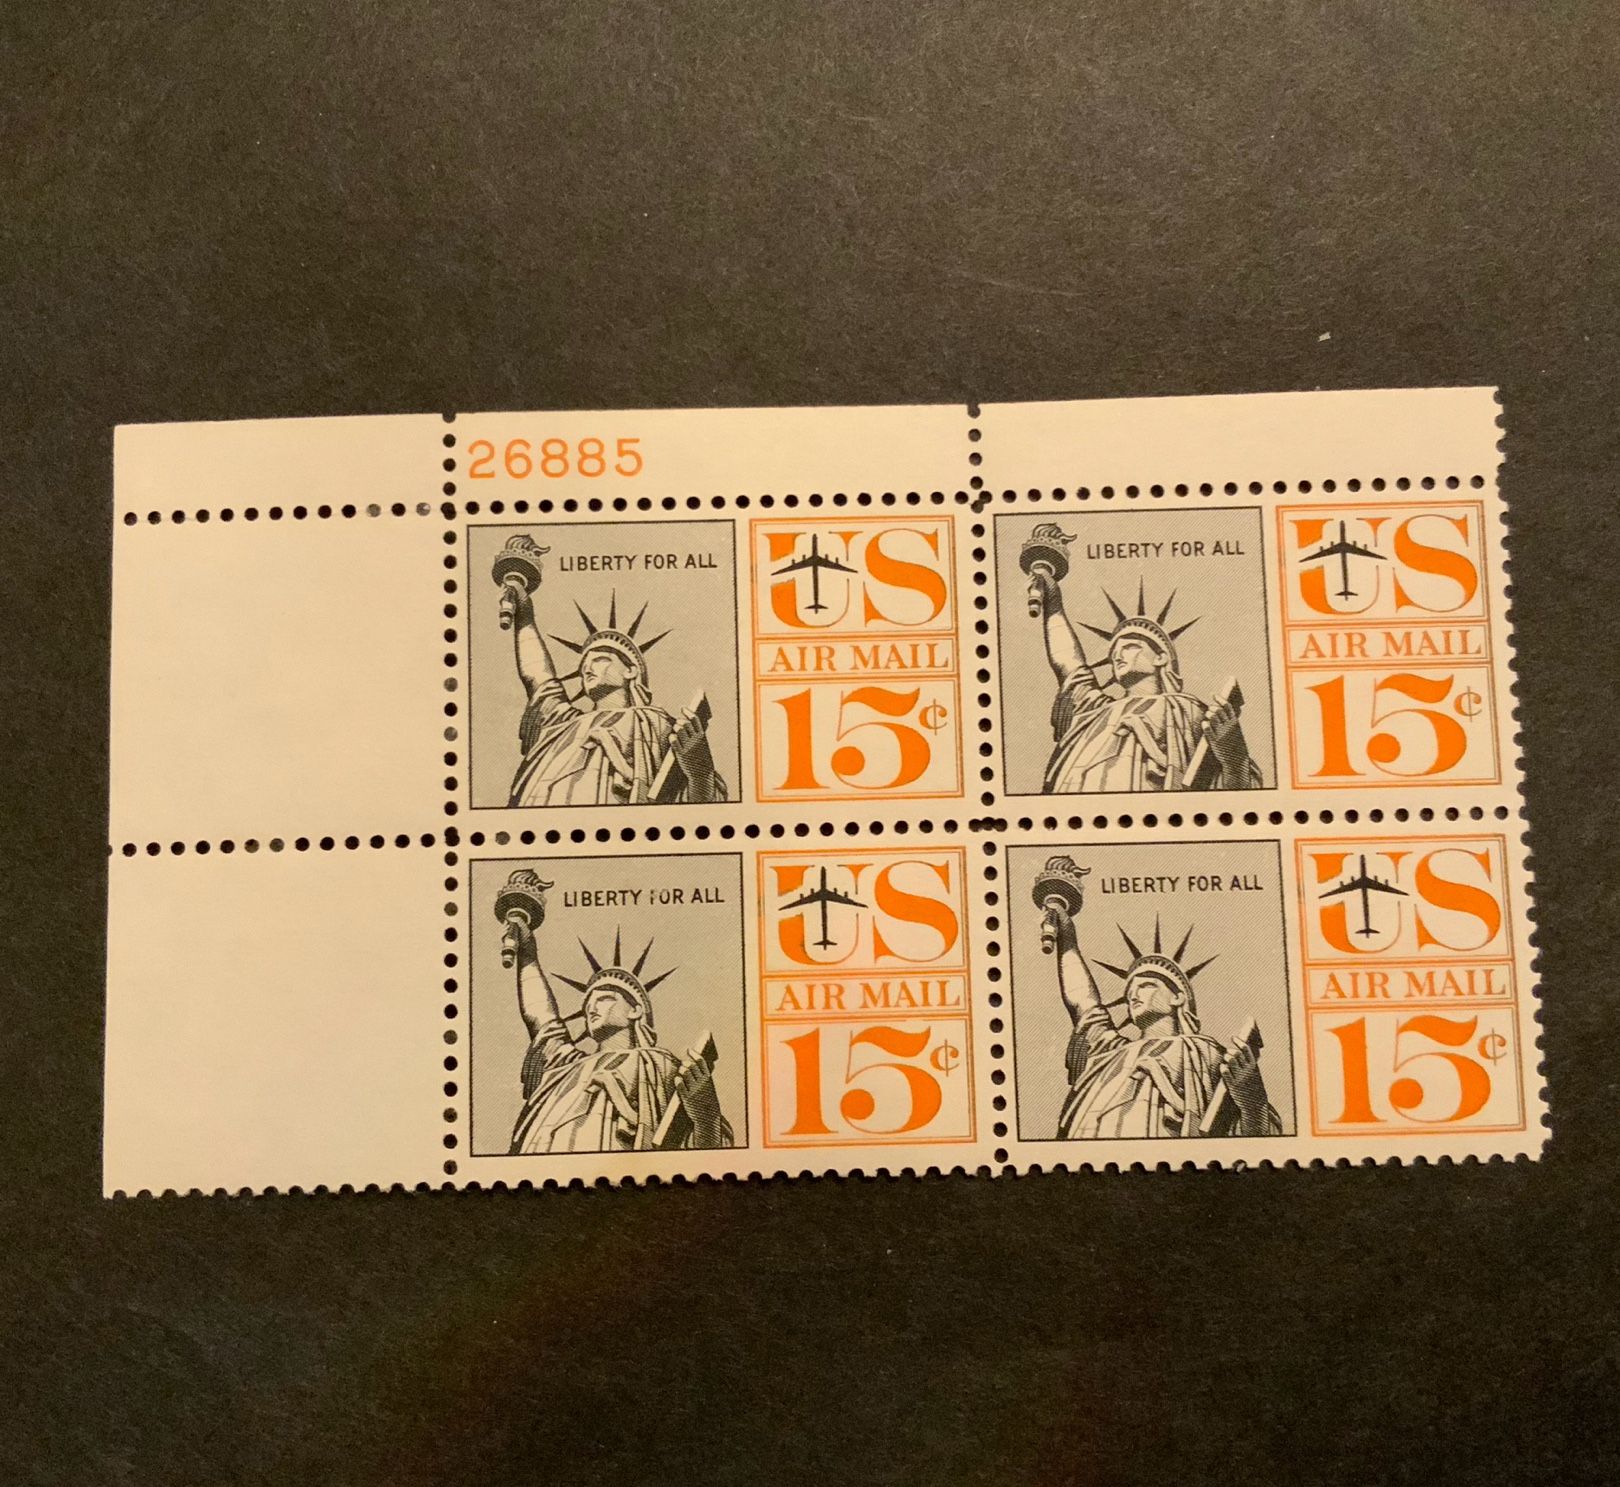 Statue of Liberty Air Mail Stamps 4 Block